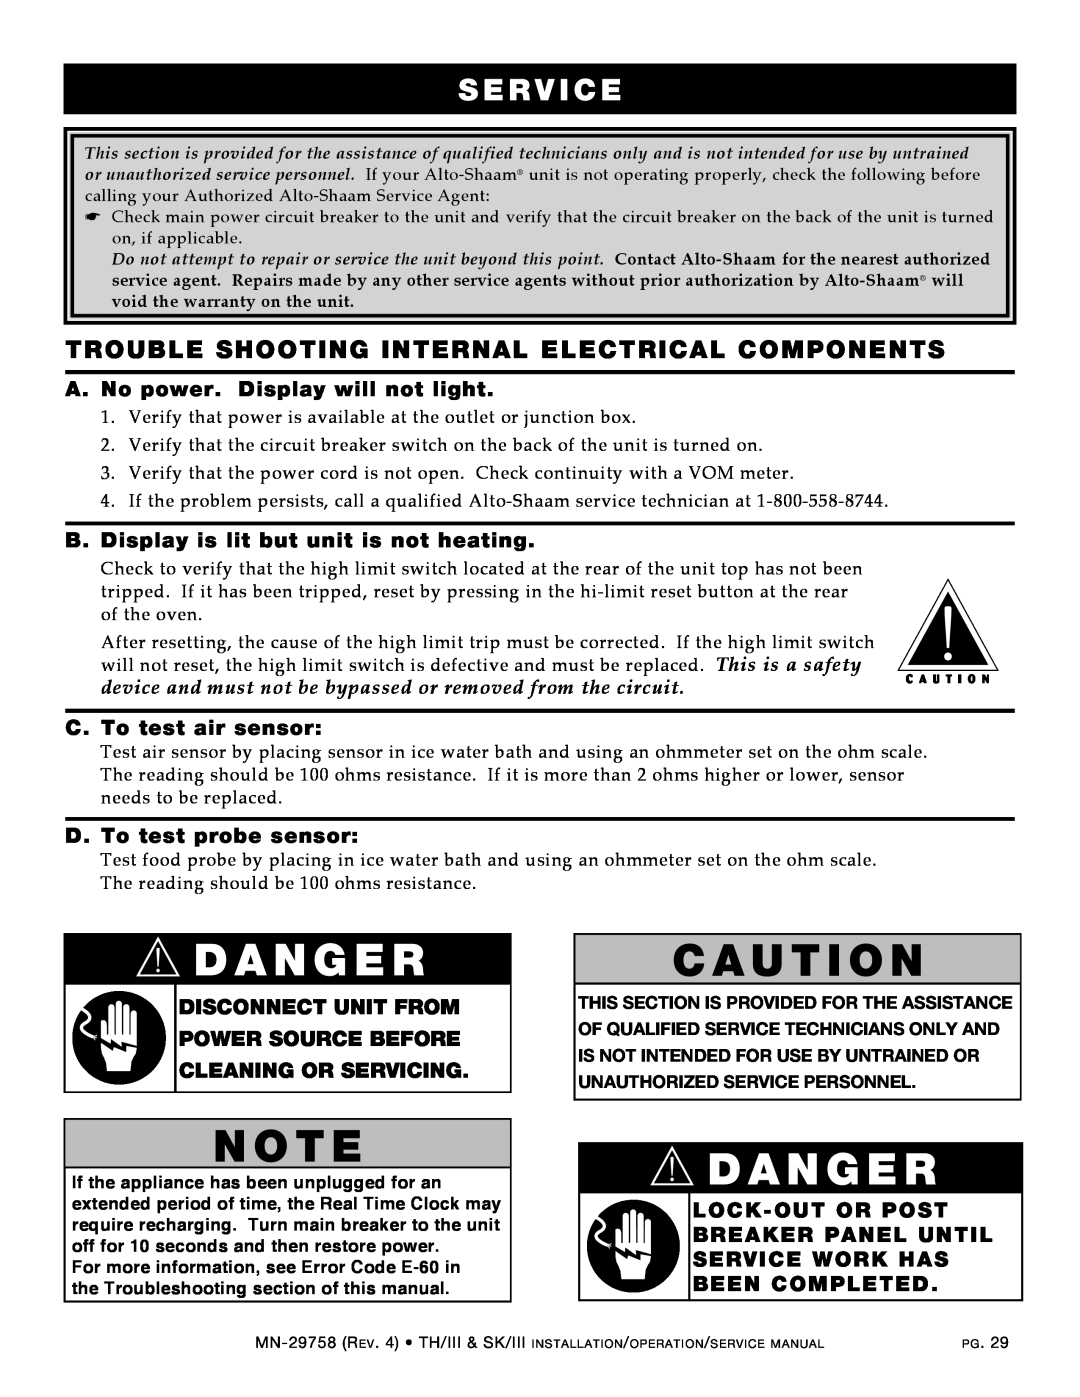 Alto-Shaam 500-TH/III manual dANgER, Se r v ice, trouble shooting Internal Electrical Components, C. To test air sensor 